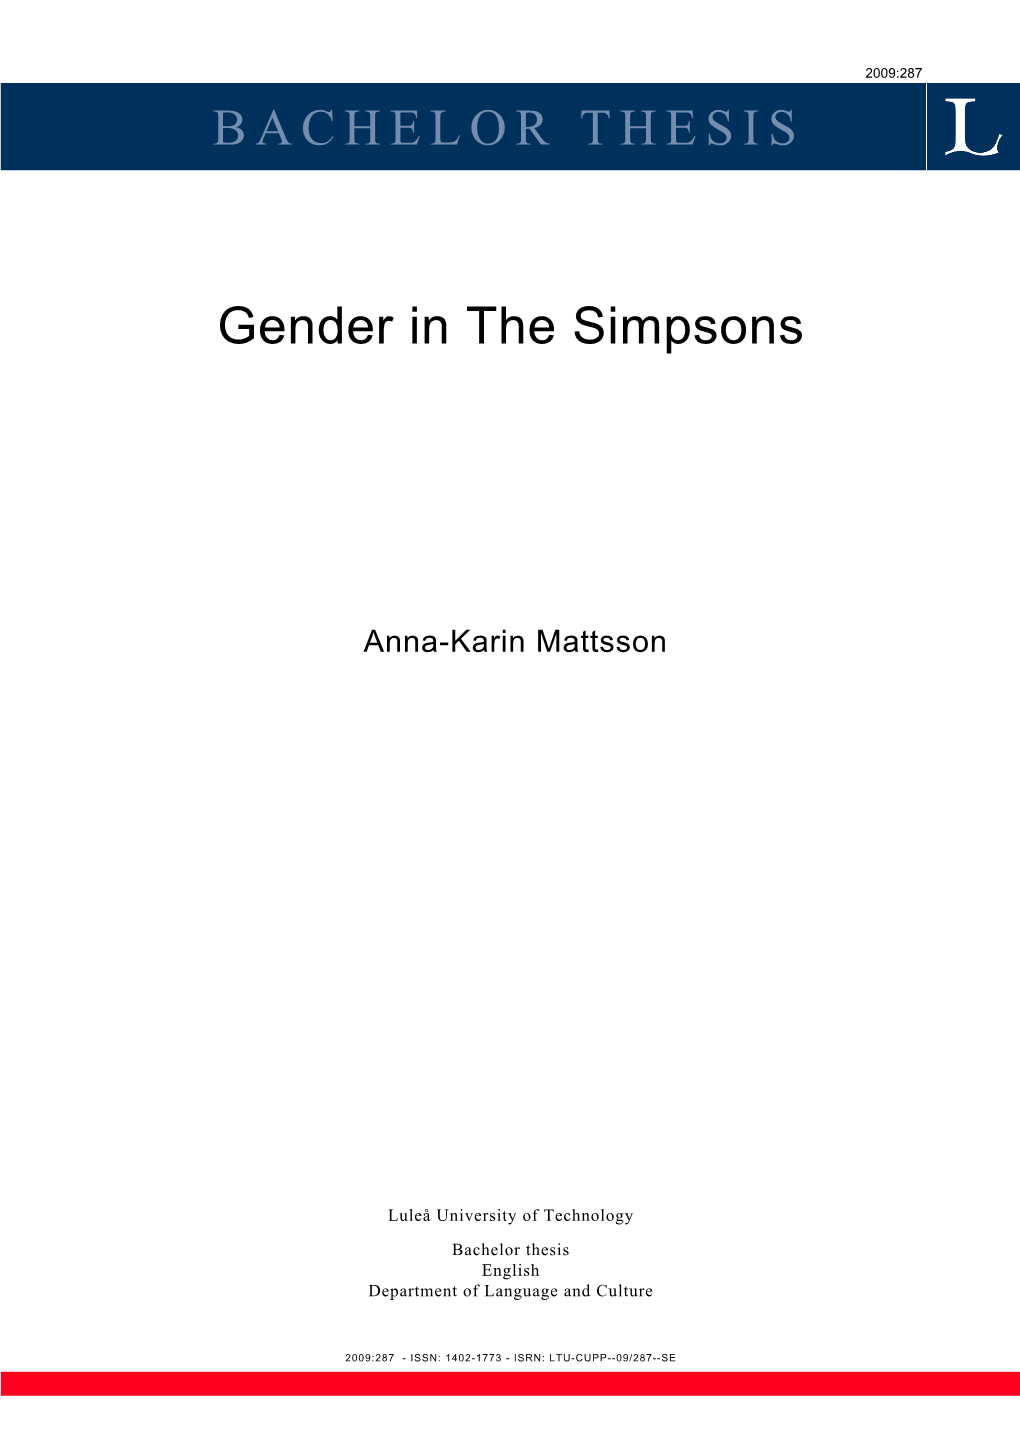 BACHELOR THESIS Gender in the Simpsons